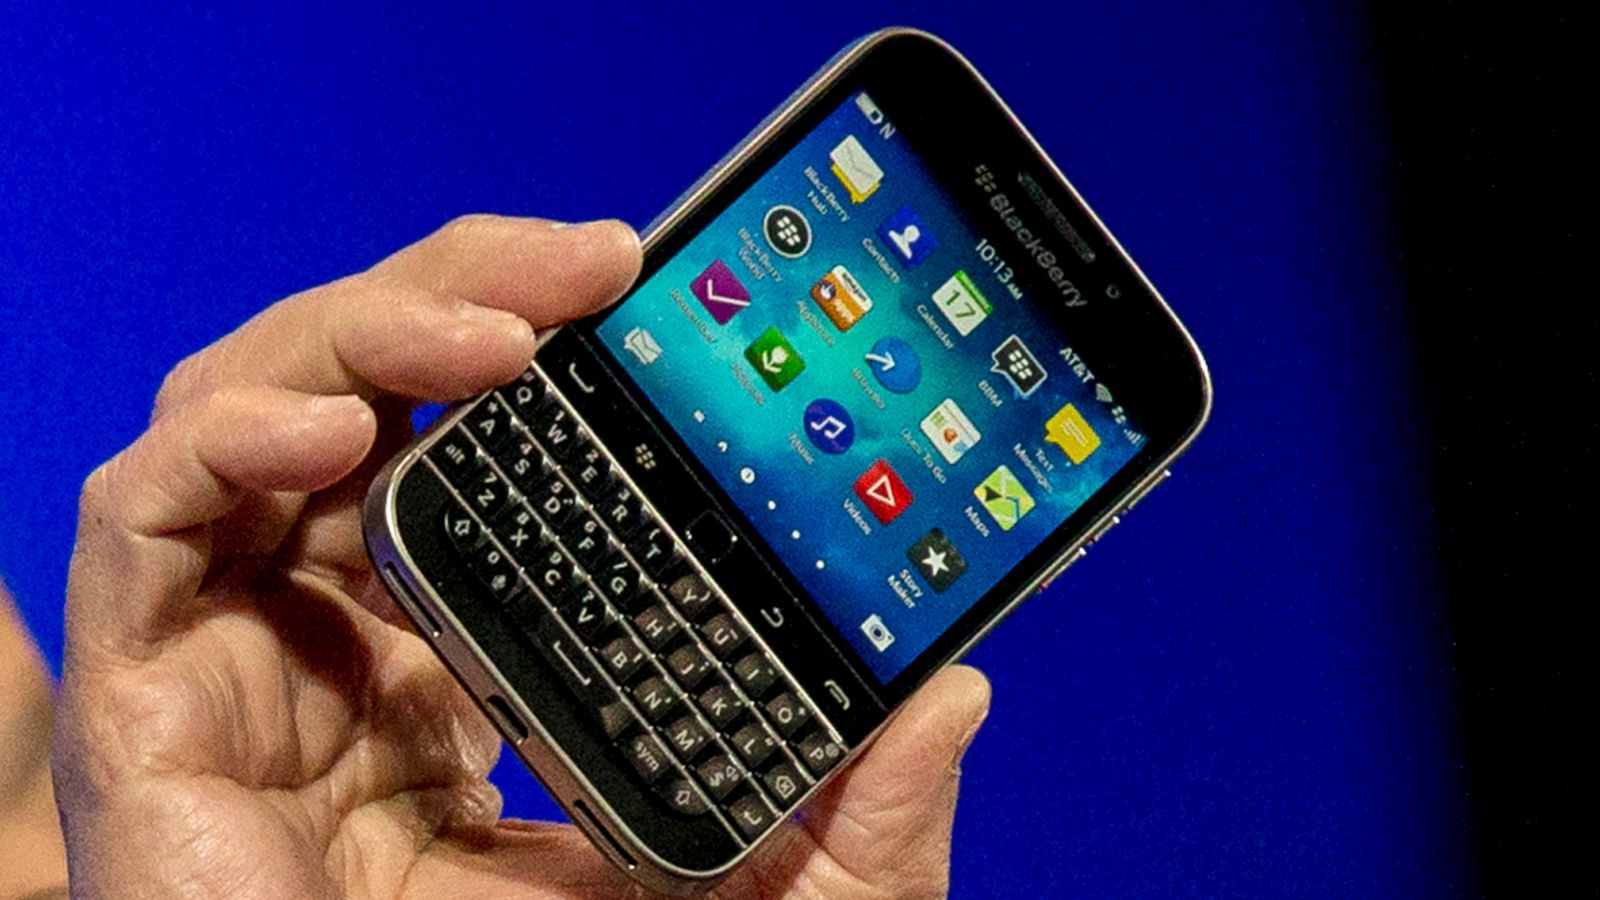 BlackBerry: End of an era as company pulls plug on iconic handsets